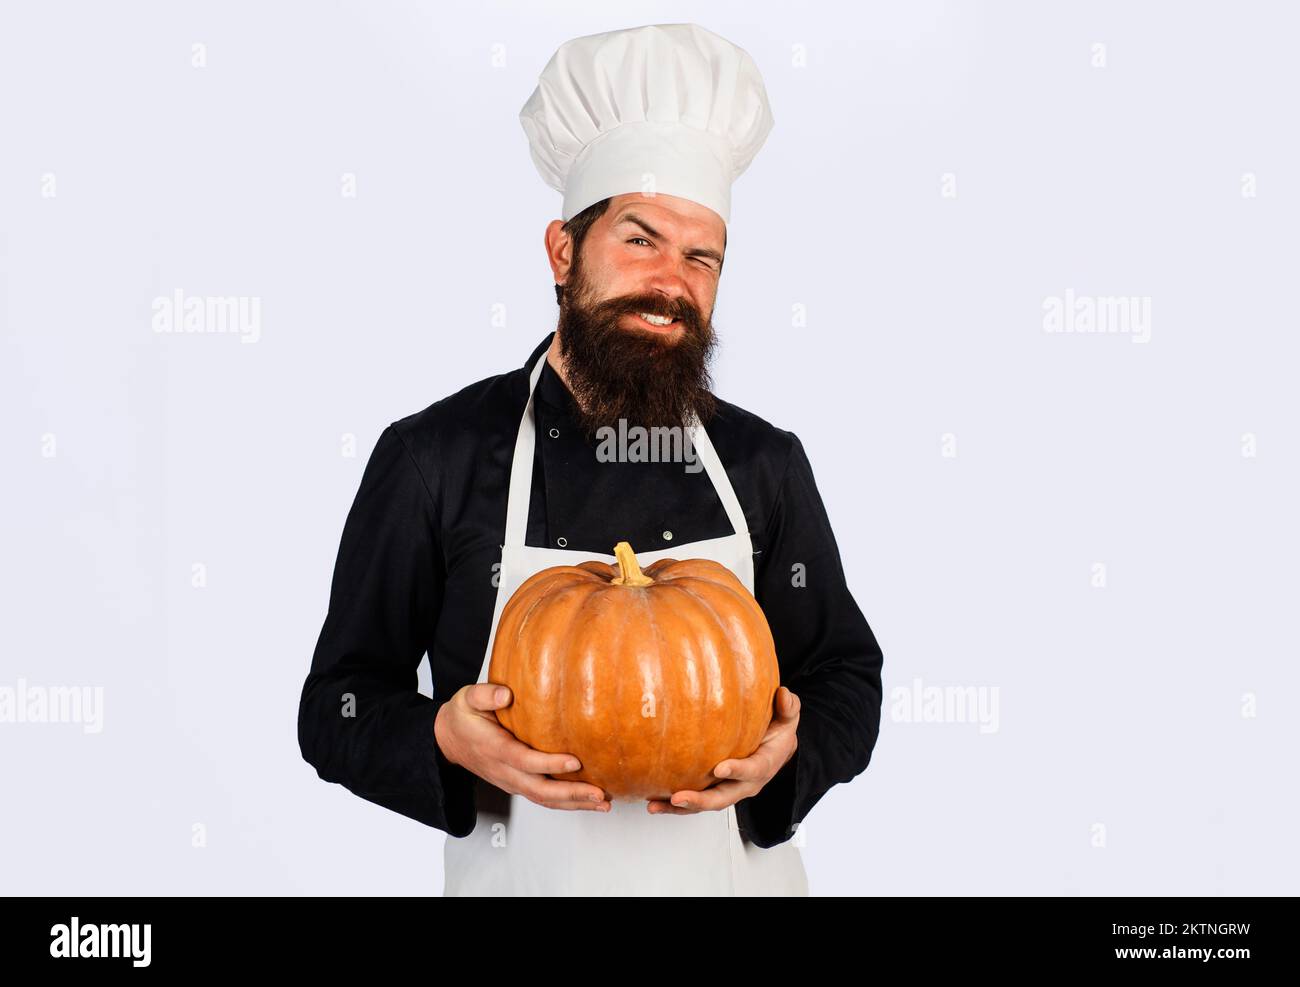 Autumn vegetables. Diet food. Healthy vegetarian eating. Bearded man in chef uniform with pumpkin. Stock Photo